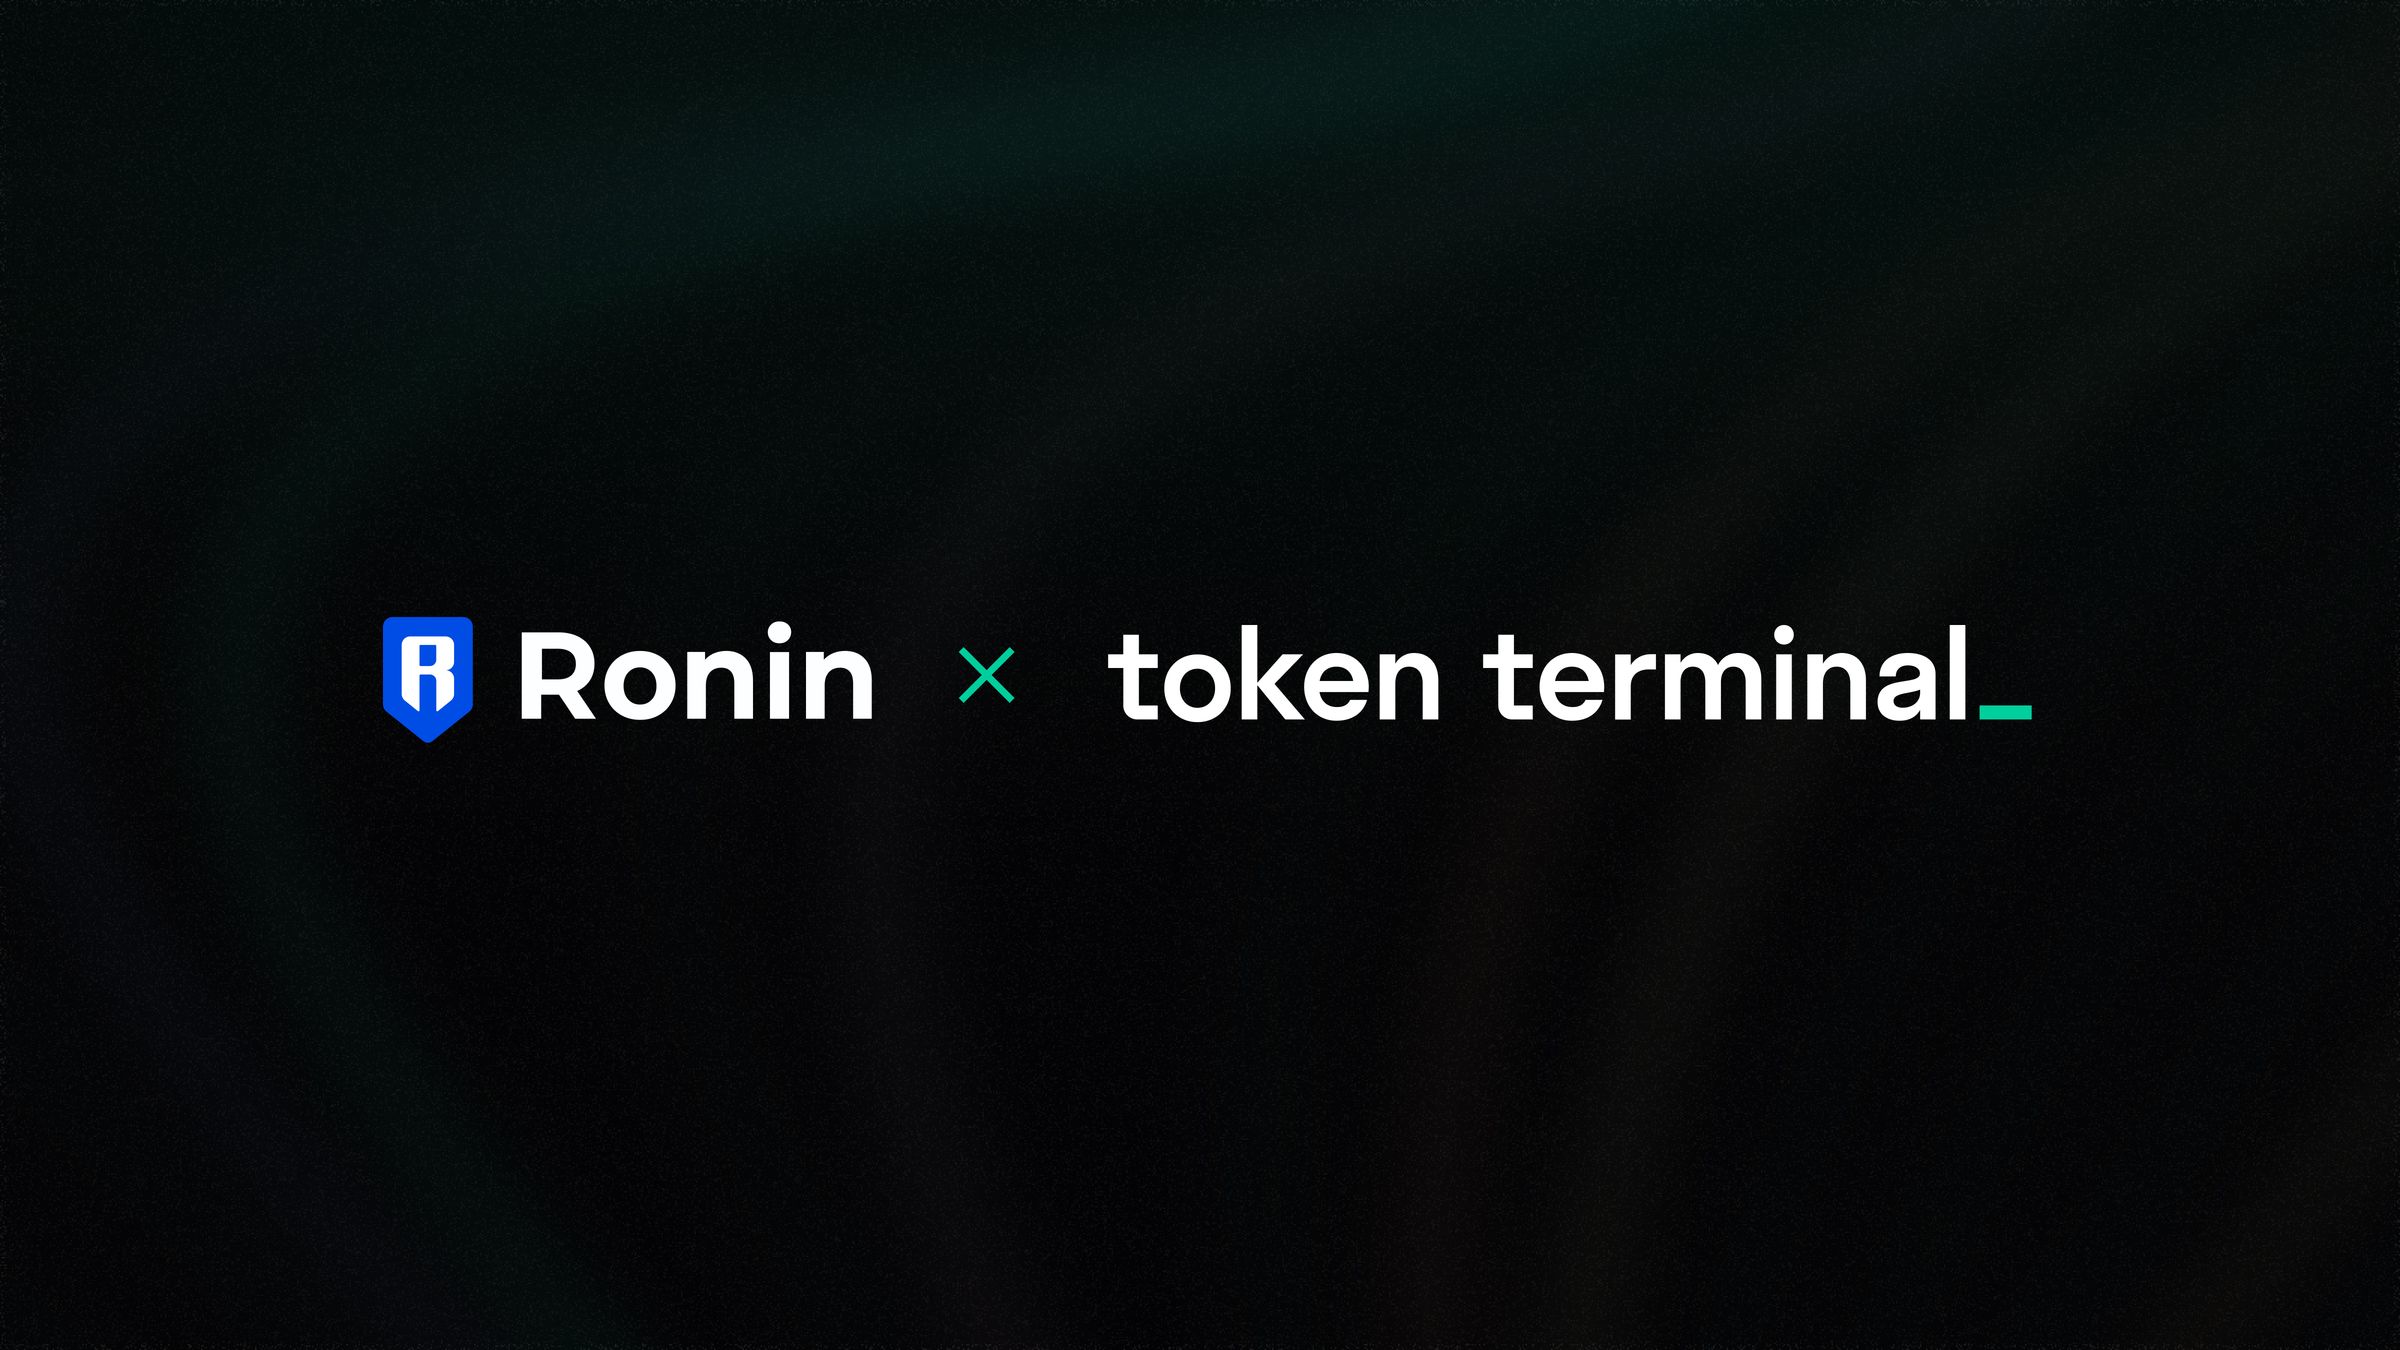 Token Terminal brings Ronin’s onchain data in front of 300,000 institutional customers